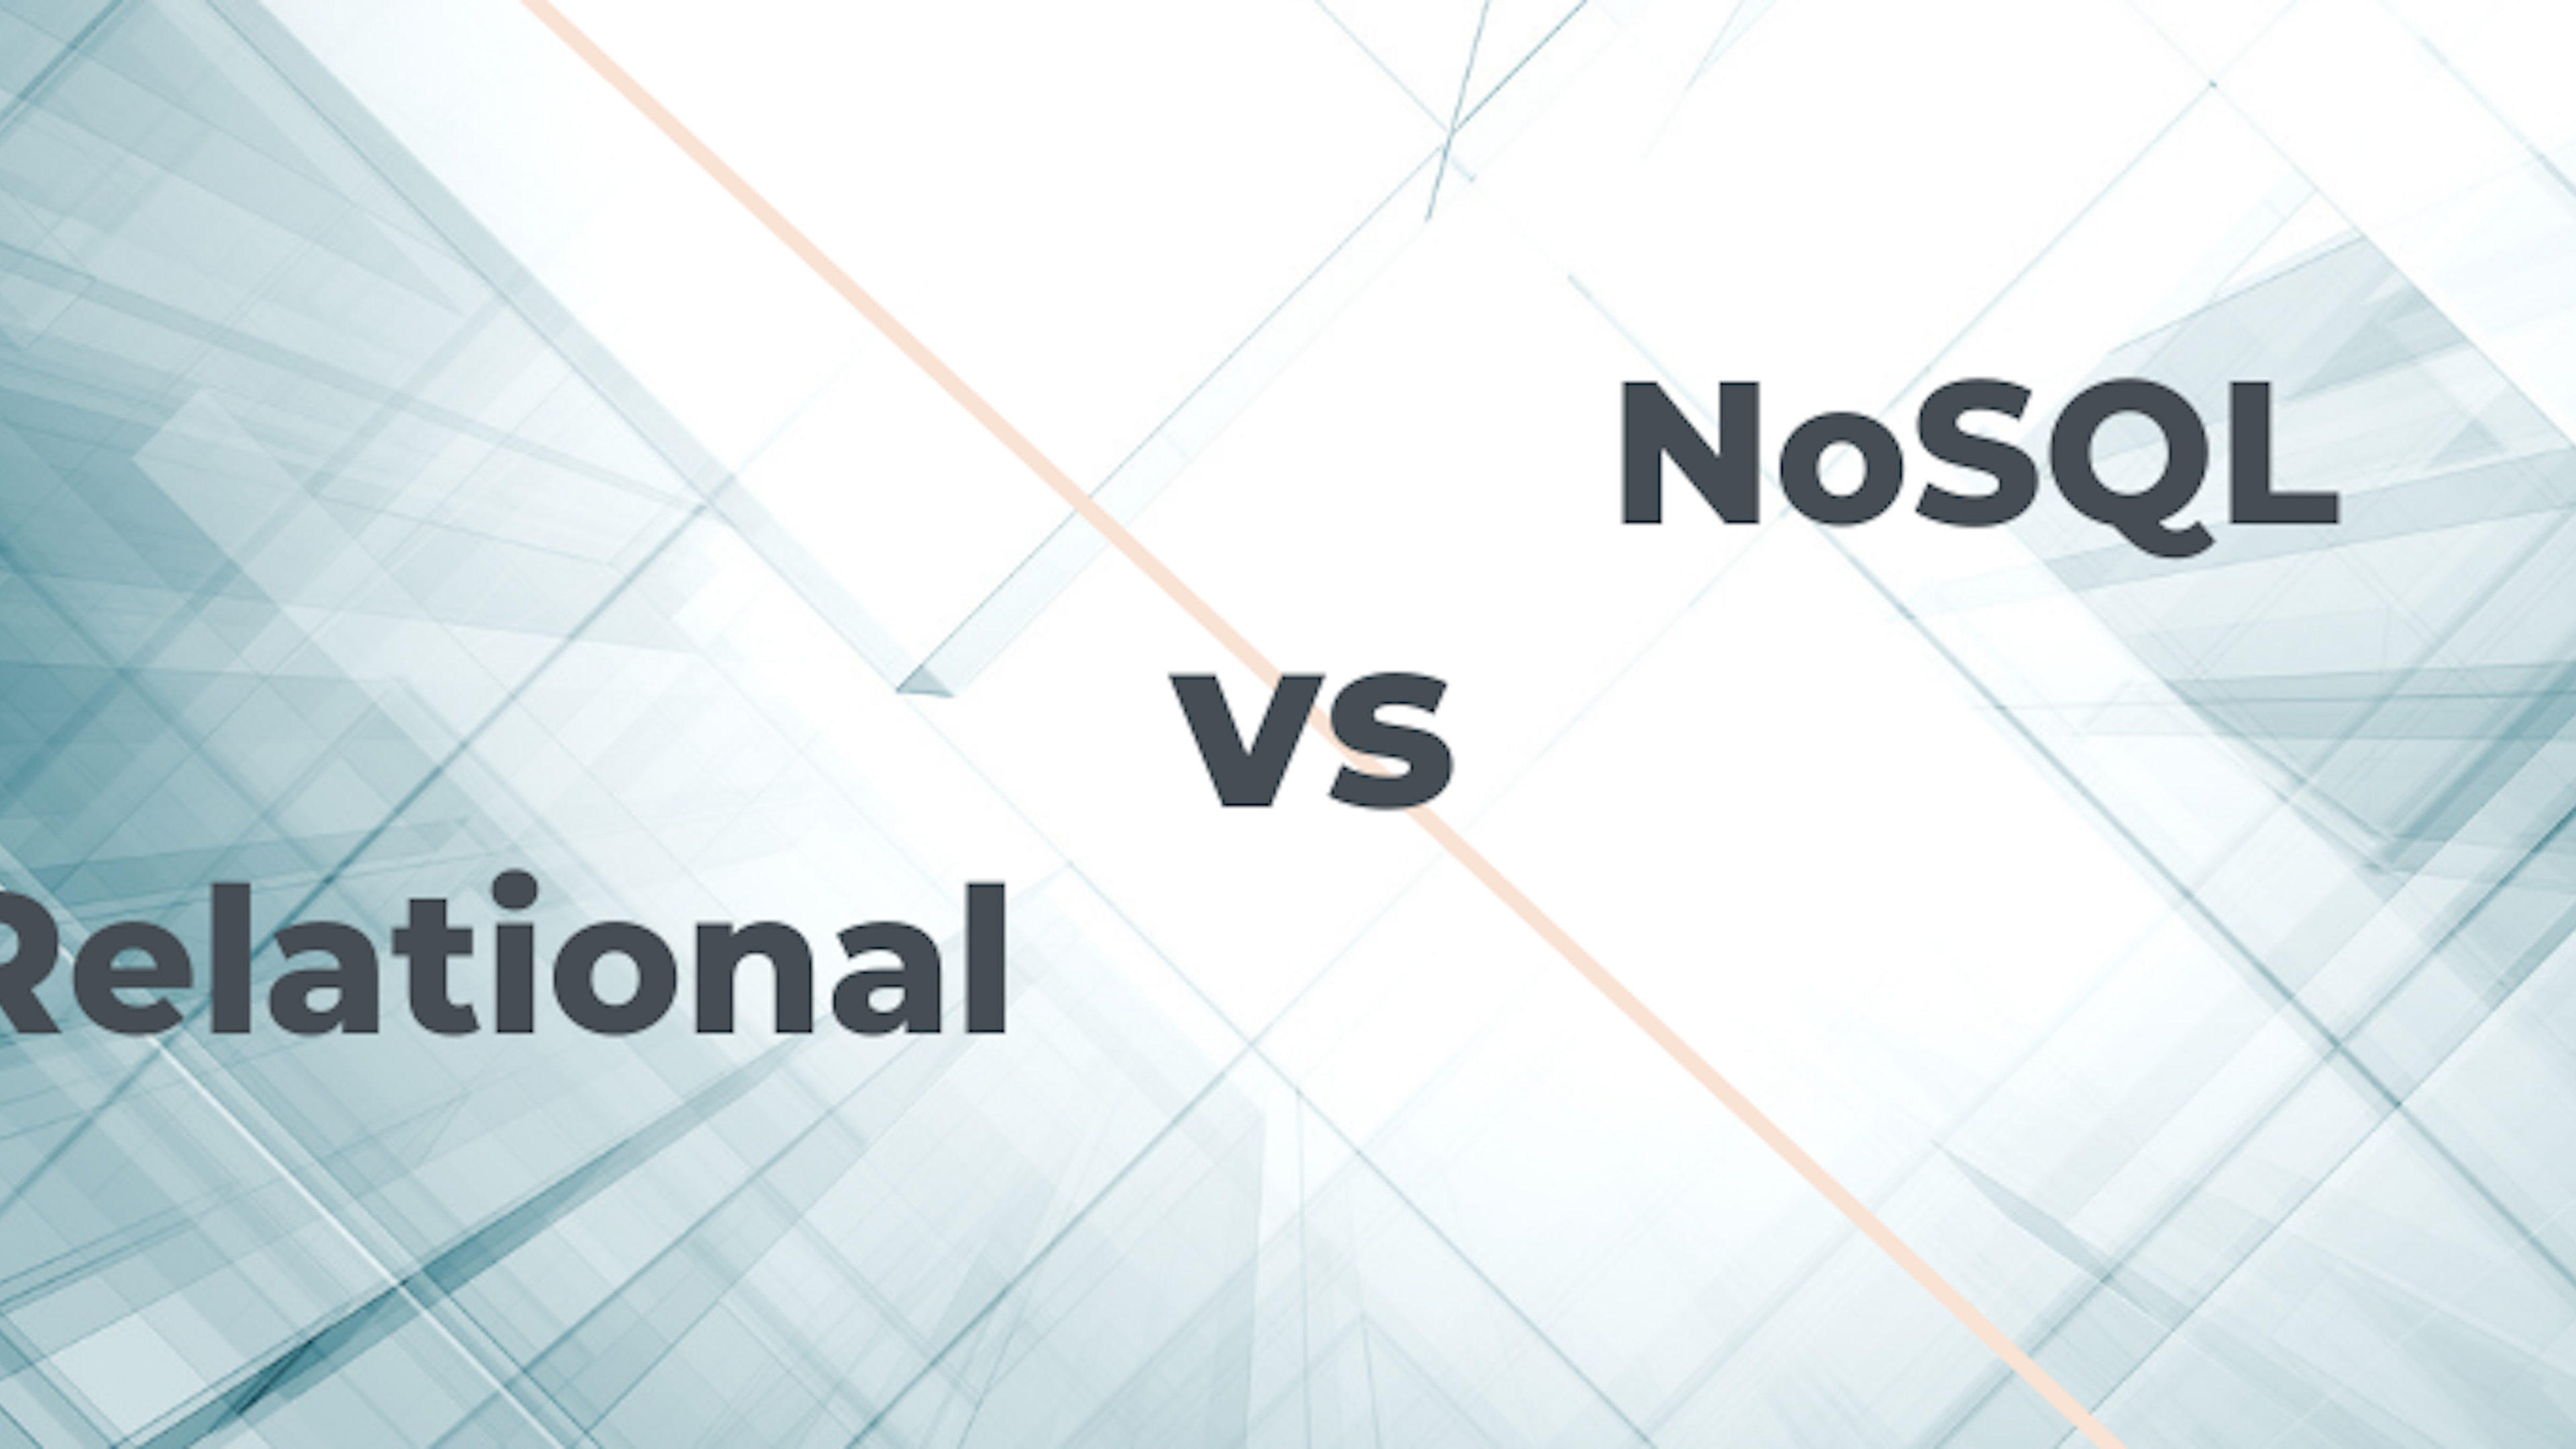 Relational (SQL) and NoSQL Databases